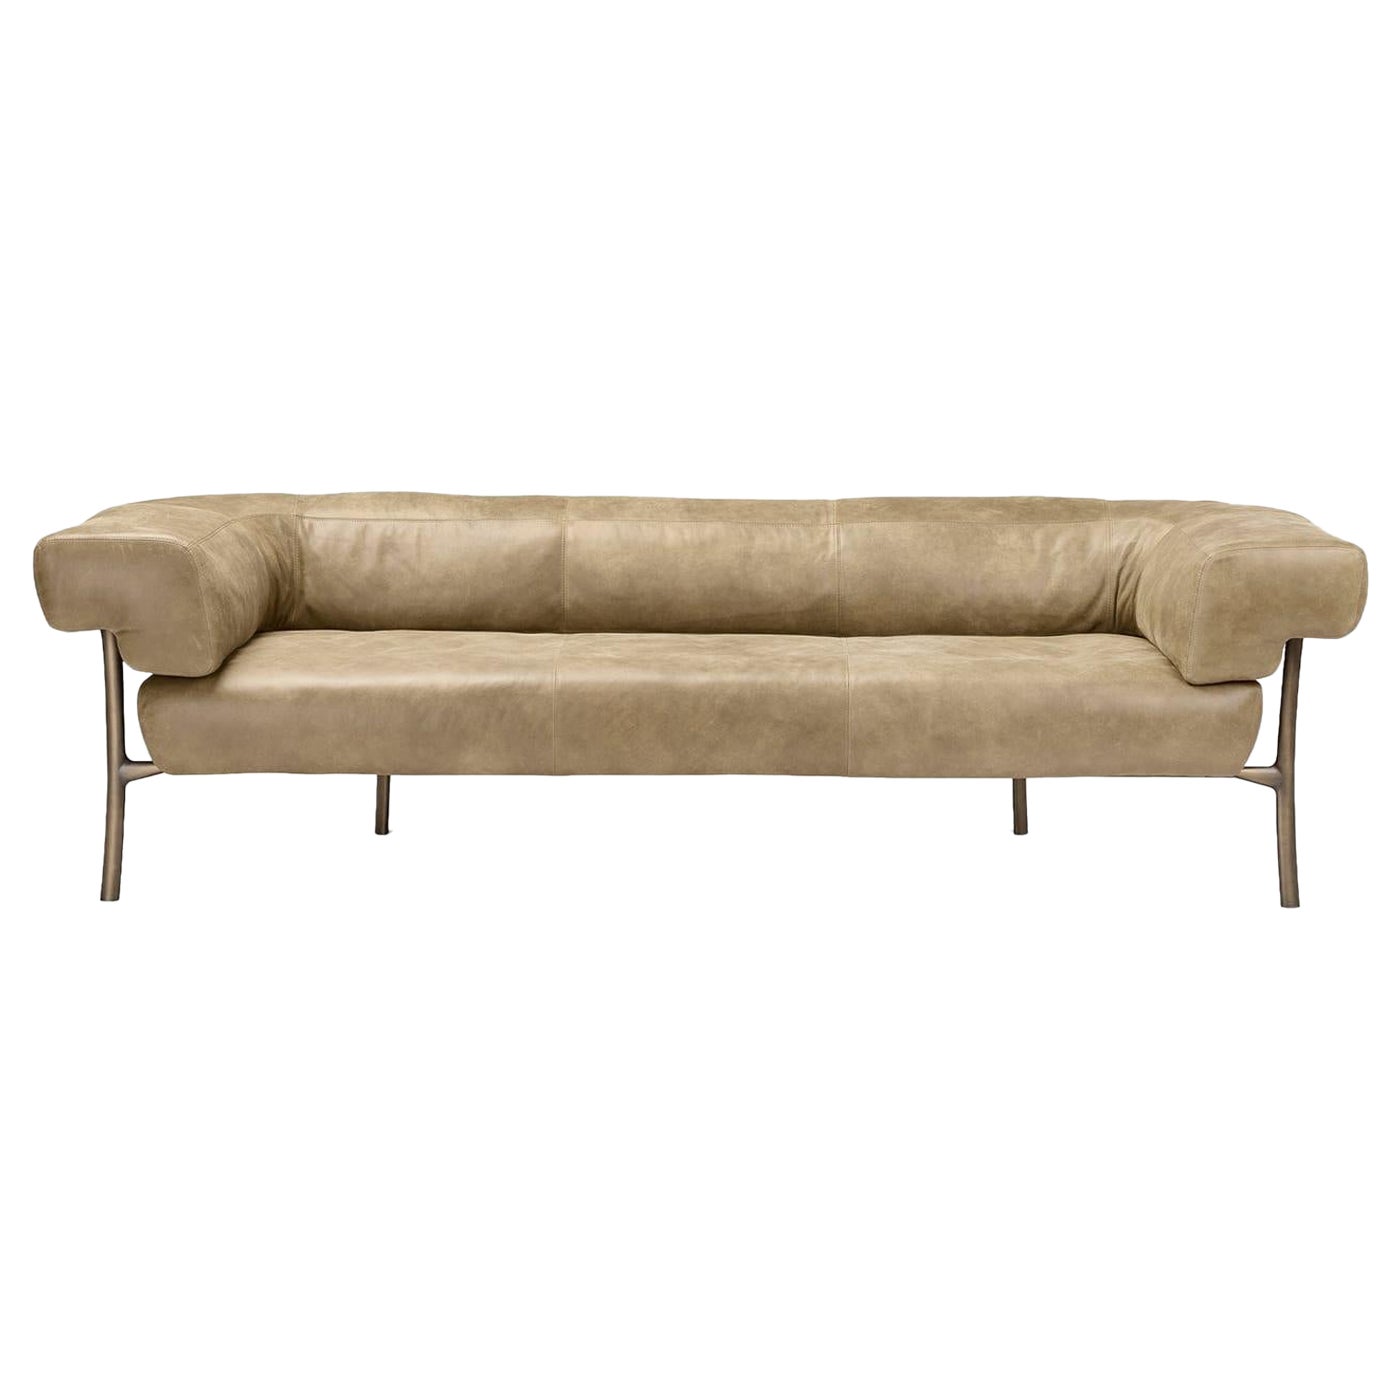 Katana Beige Leather Sofa by Paolo Rizzatto For Sale